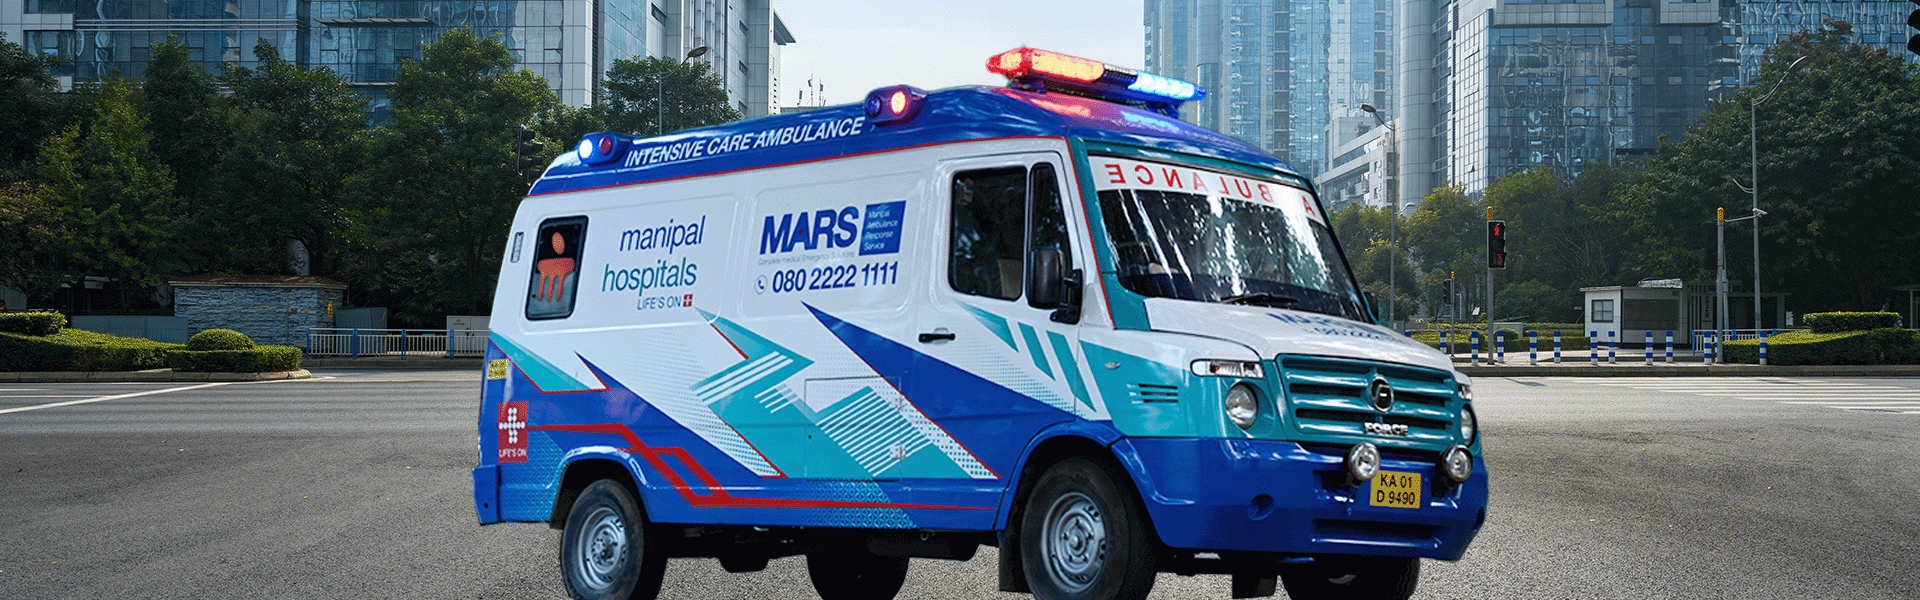 24 Hours Emergency Ambulance Service in Sarjapur Road, Bangalore -Manipal Hospitals